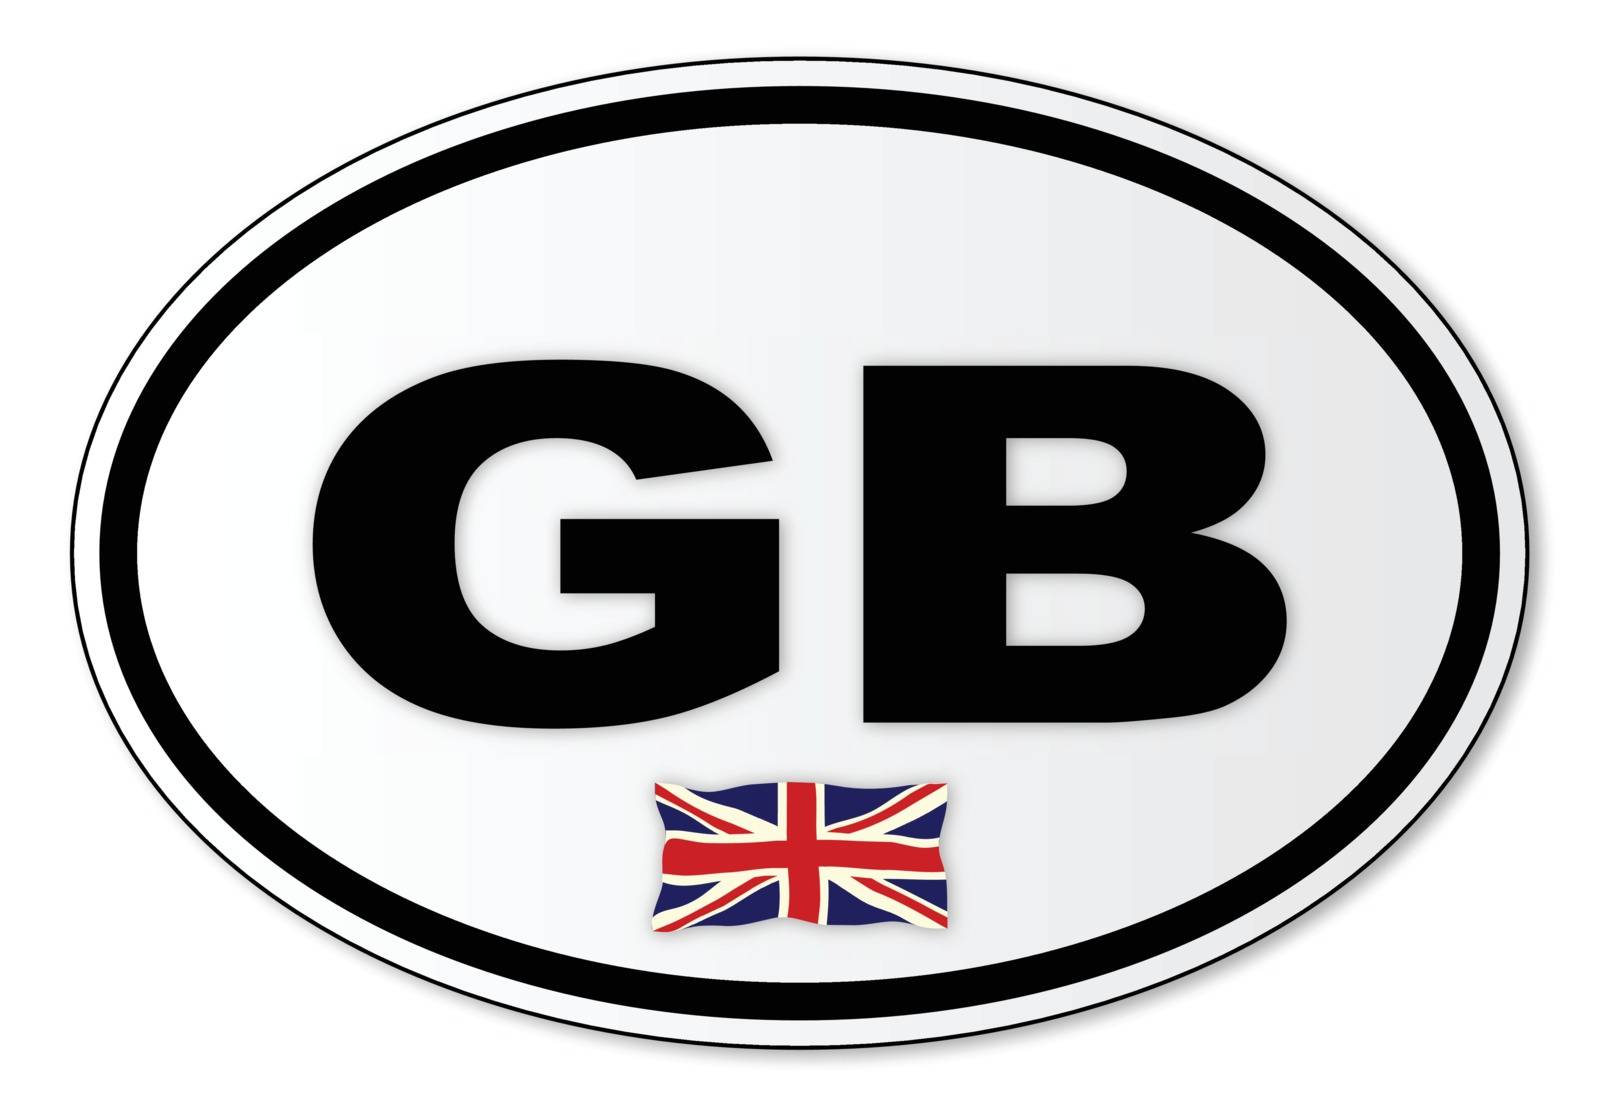 The GB plate attached to vehicles from the UK traveling abroad